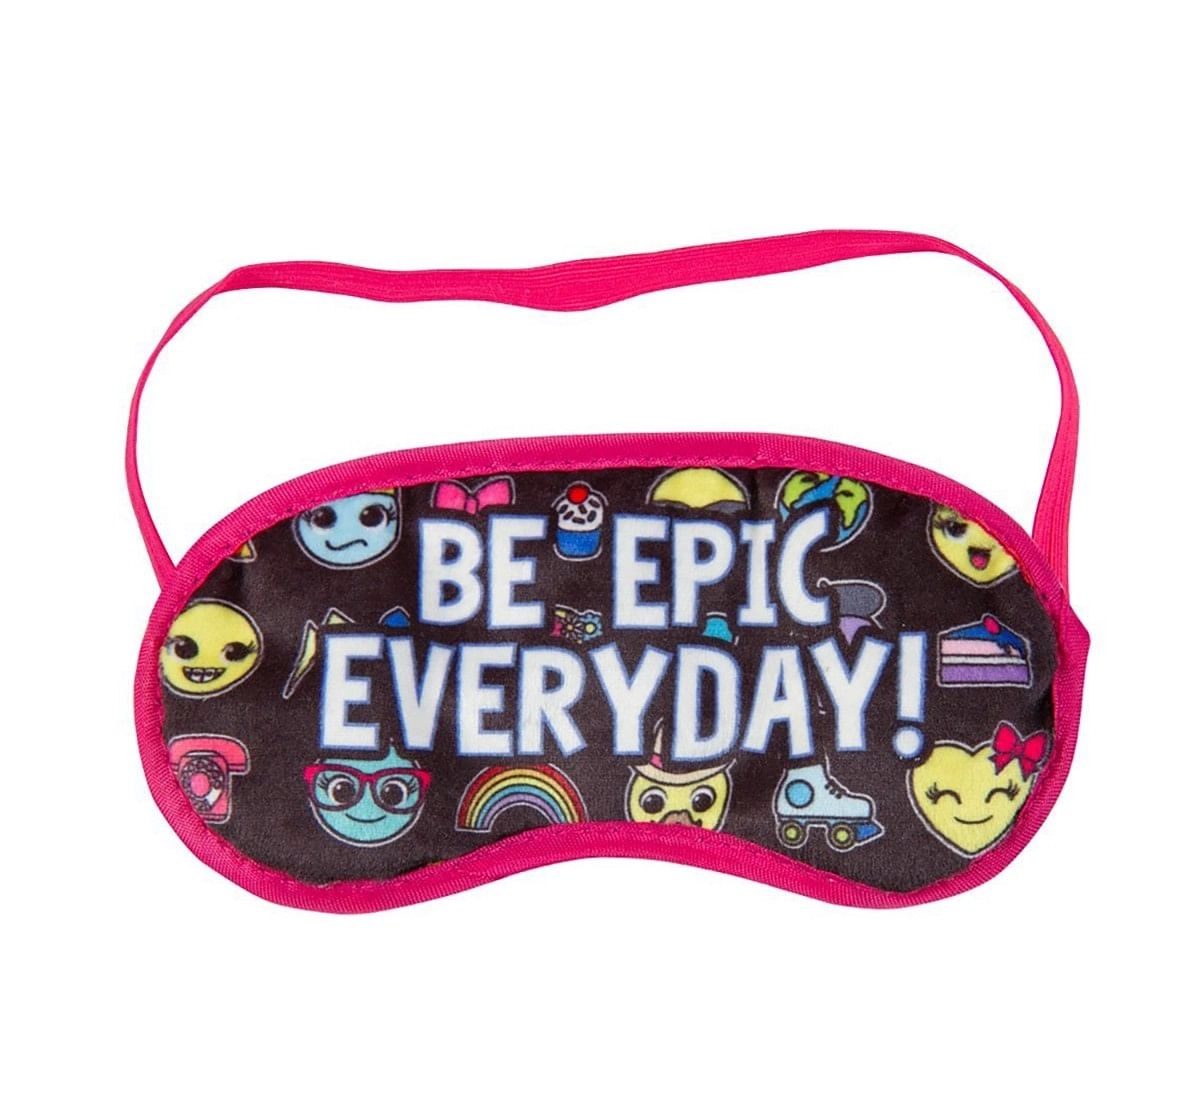 Fashion Angels Travel Pillow And Eye Mask - Emoji Novelty for Kids age 8Y+ 